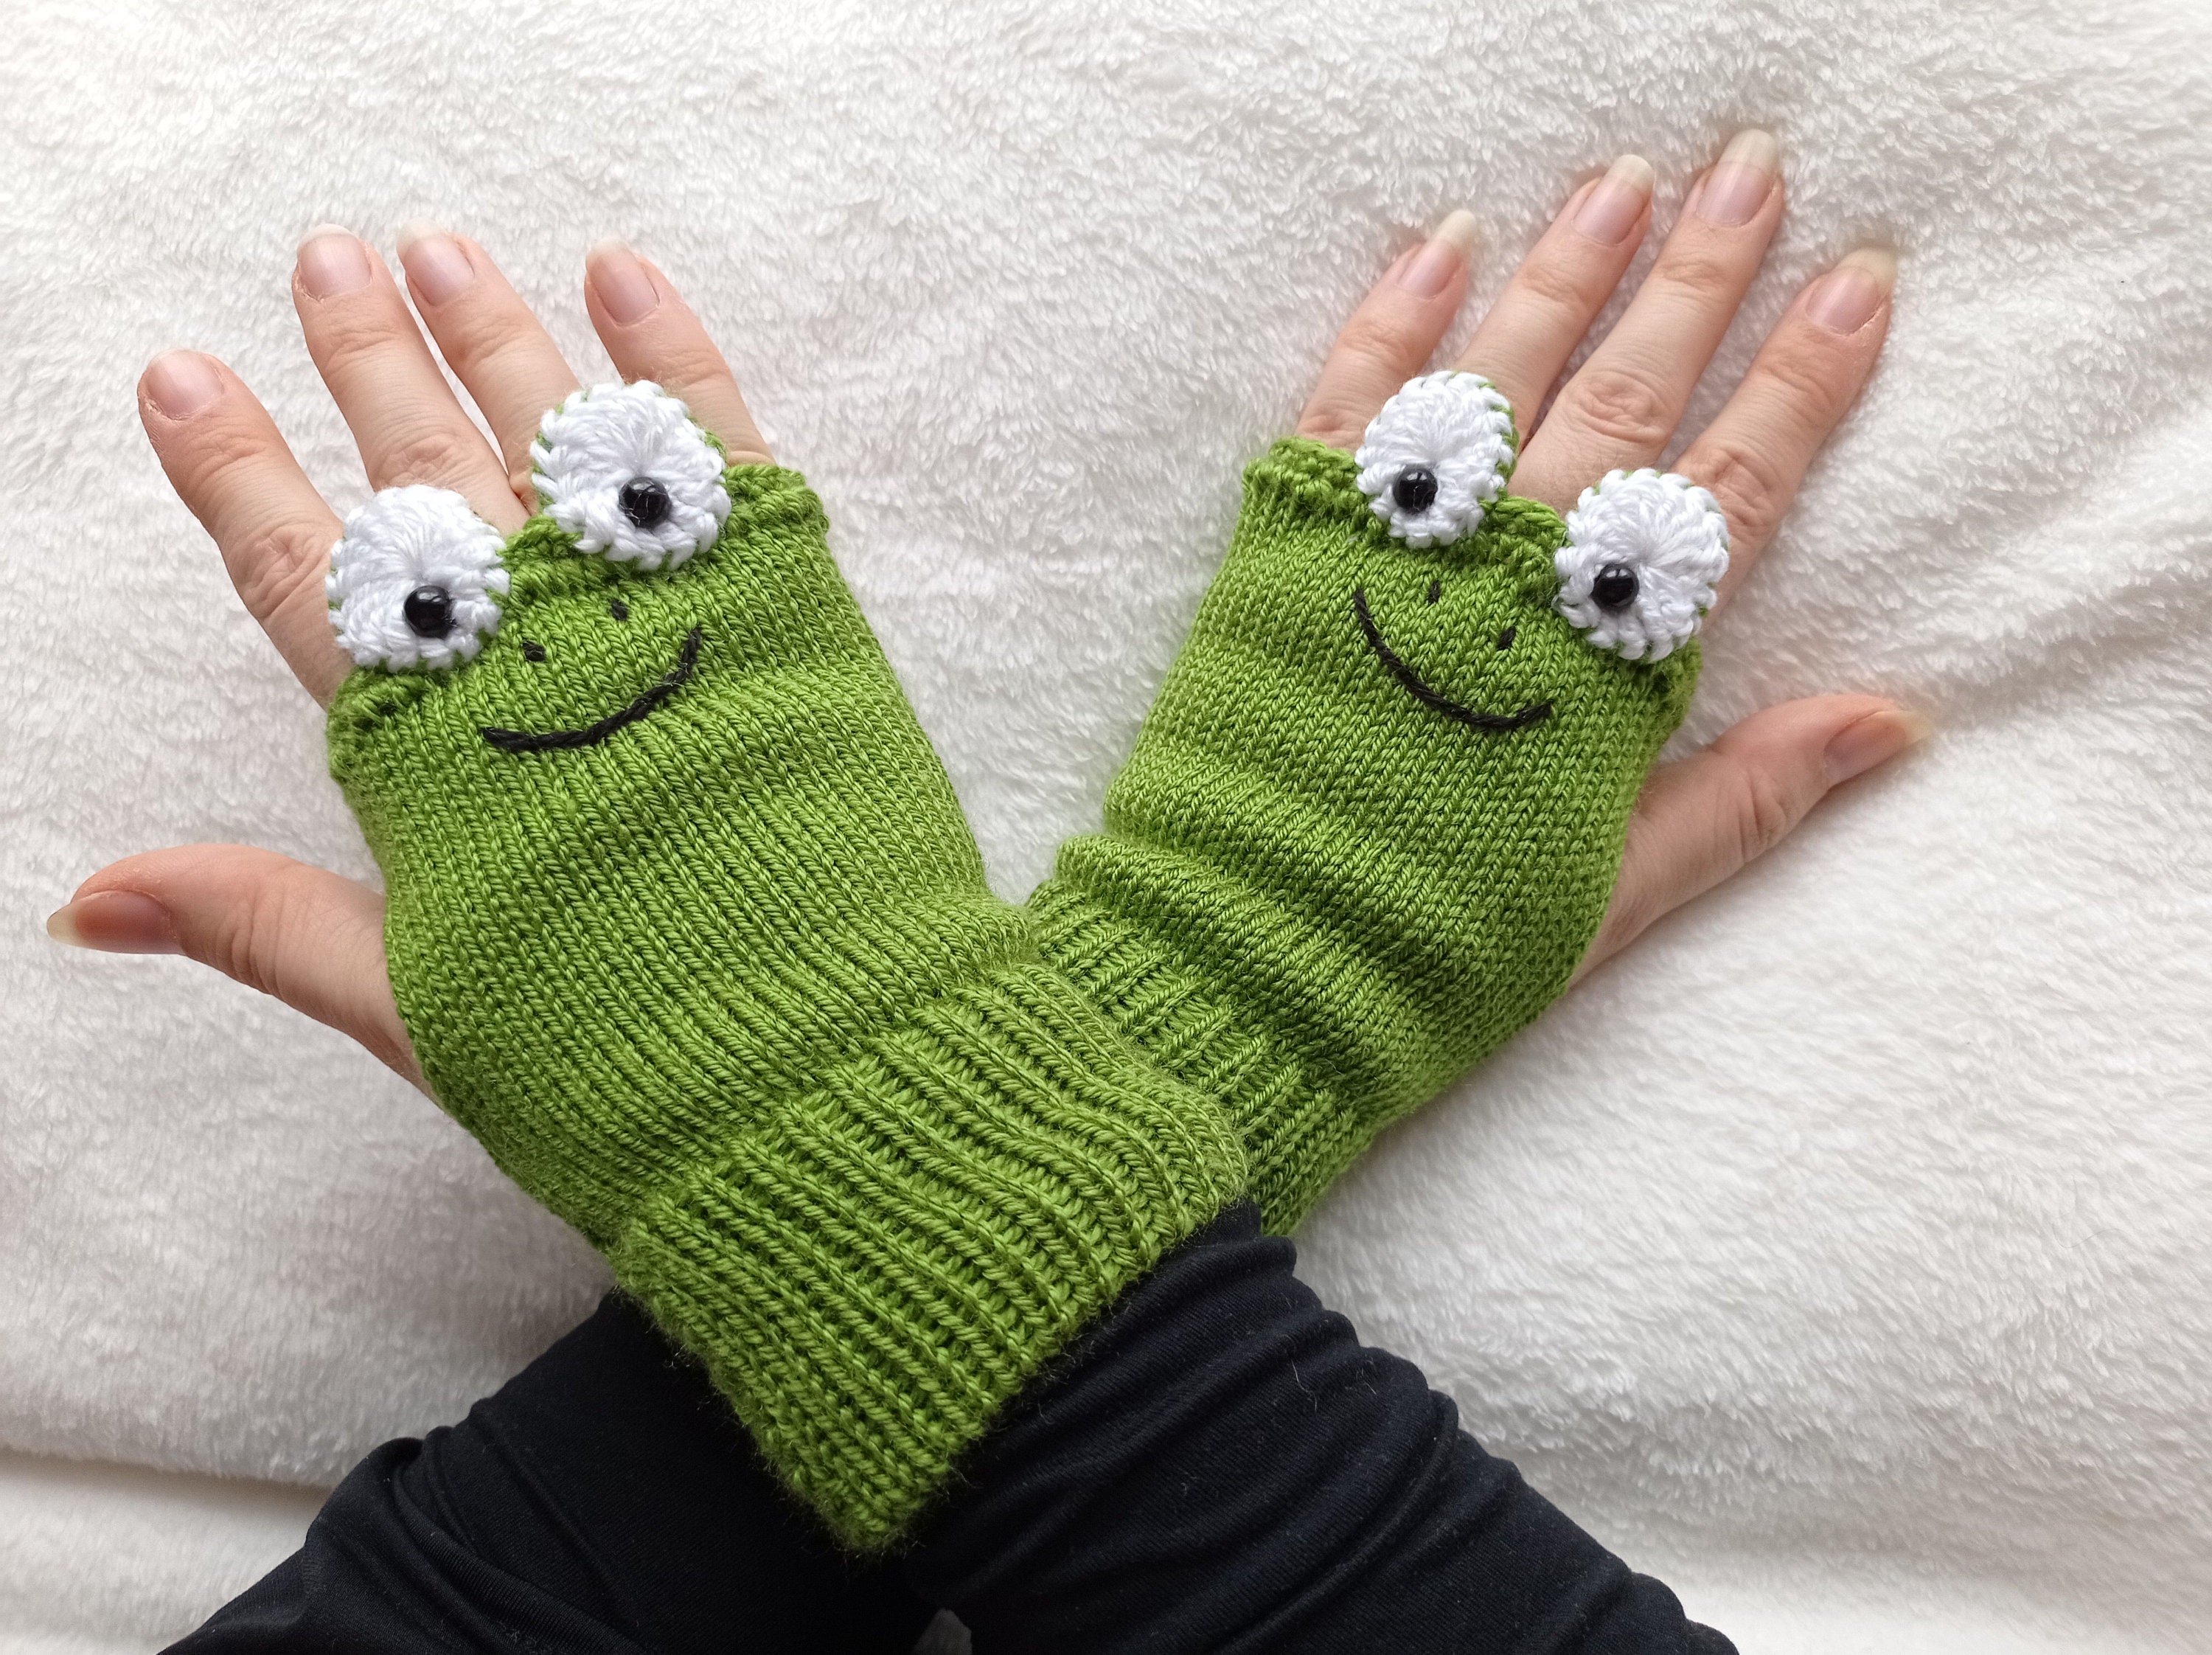 Knitting Pattern Cable Fingerless Gloves or Mitts Instant Download